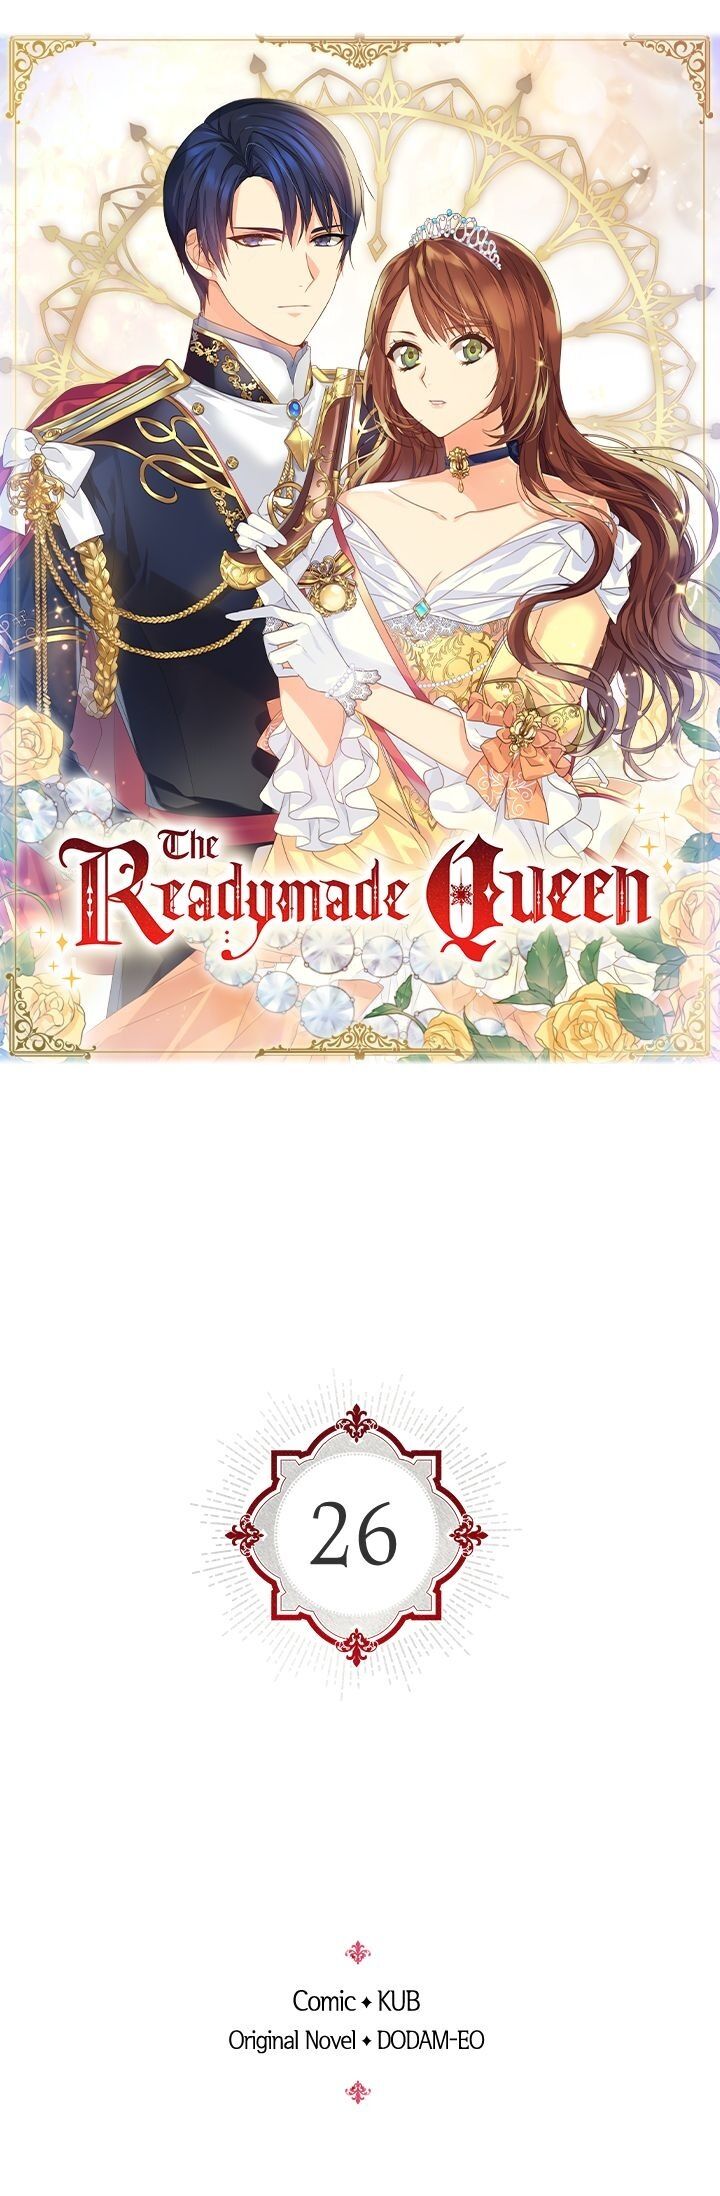 The Readymade Queen - Page 1